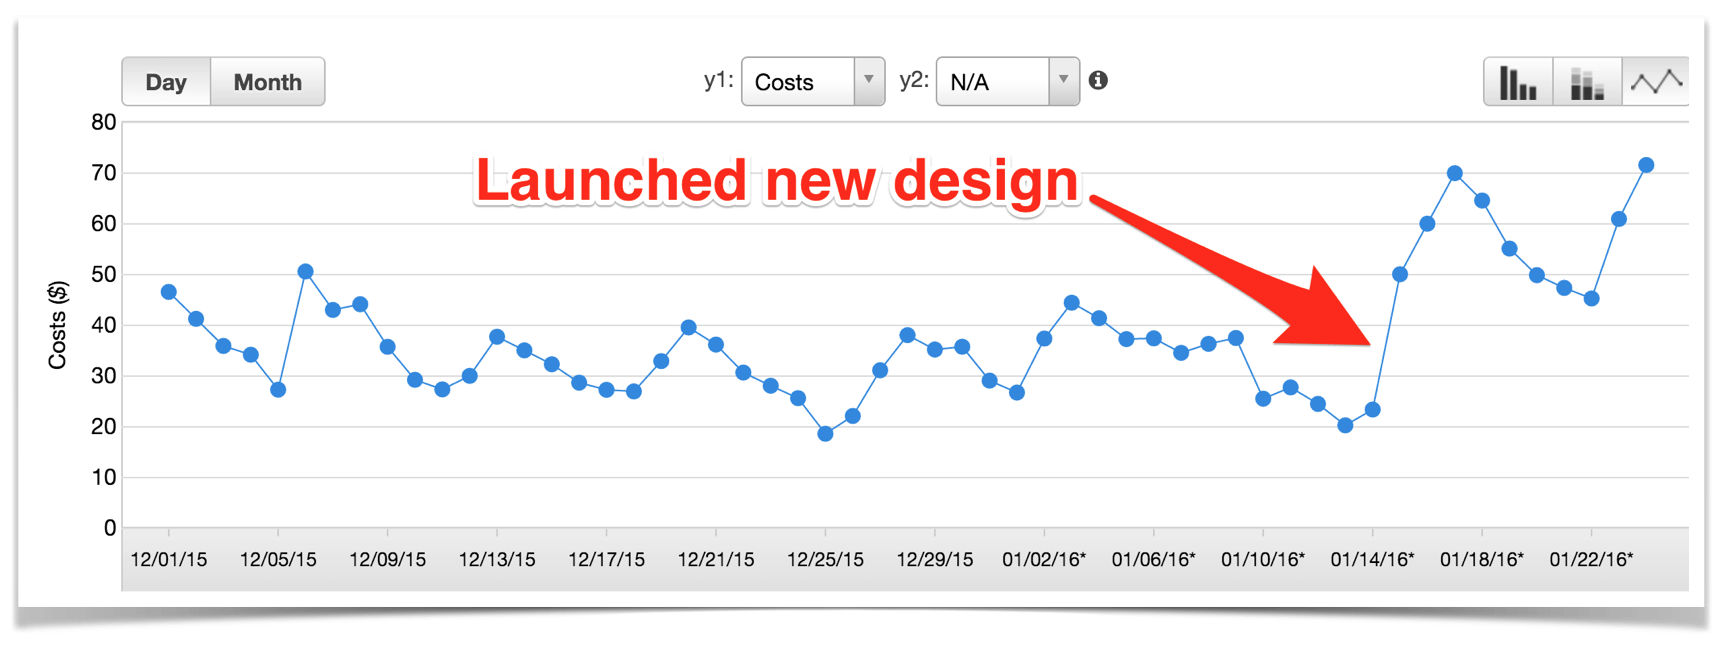 AWS costs after launching new design.